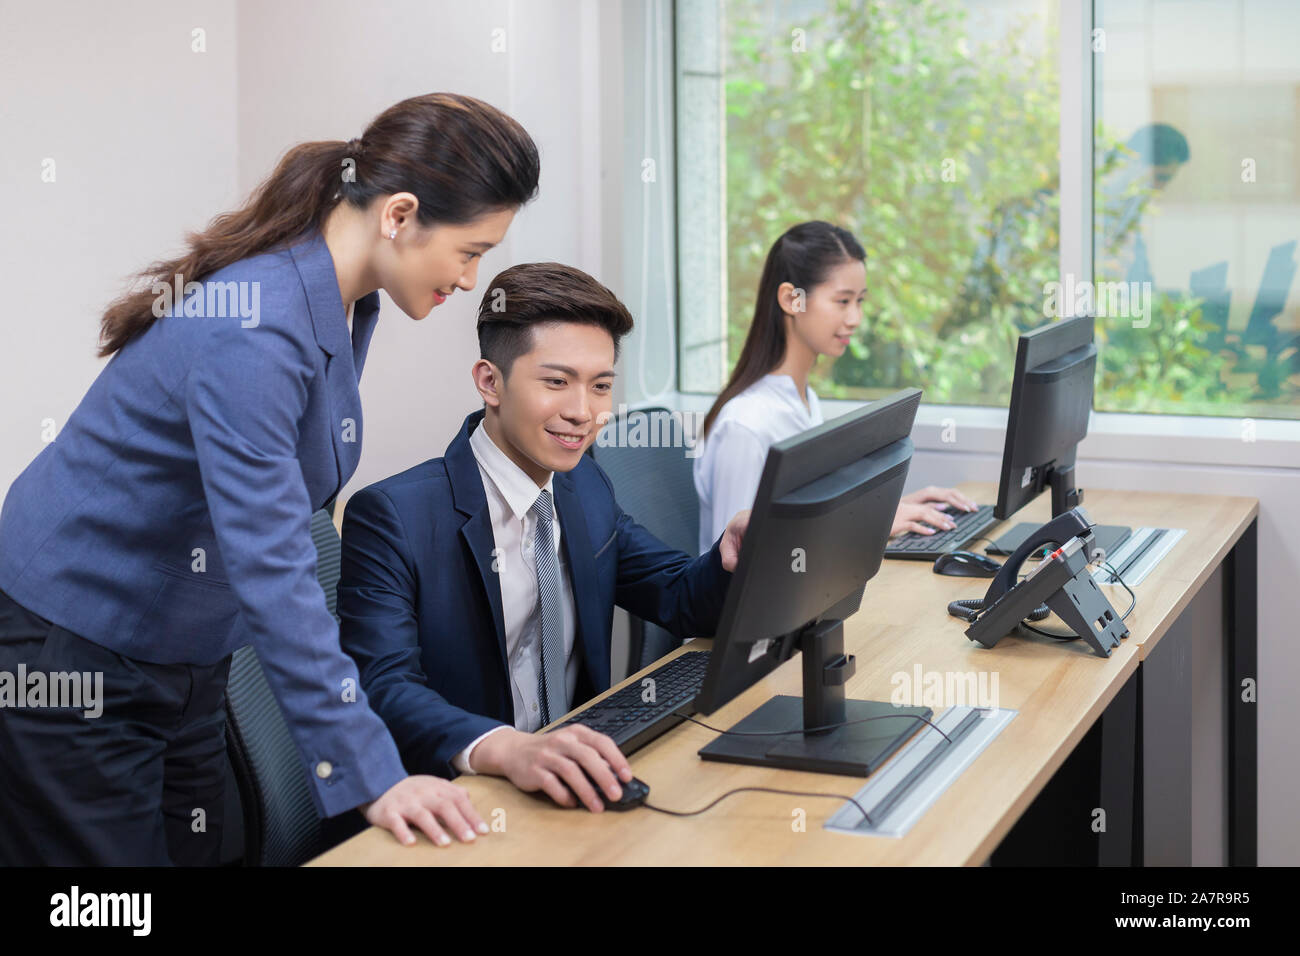 Two smiling young male and female businesspeople looking at a computer monitor of one of them while working together at a desk in an office Stock Photo